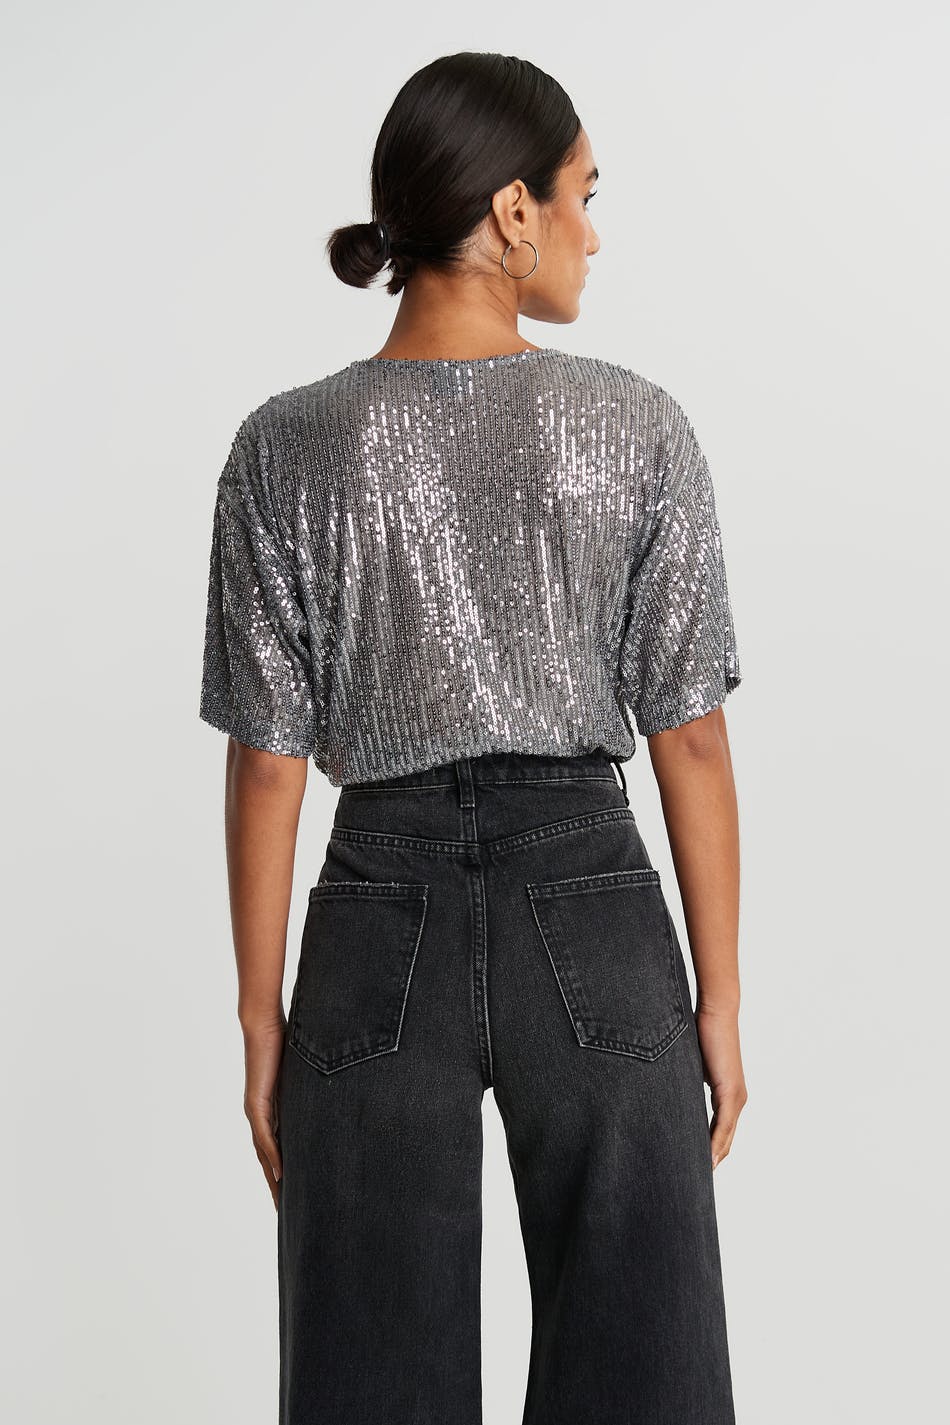 Rudy sequins top - Gina Tricot